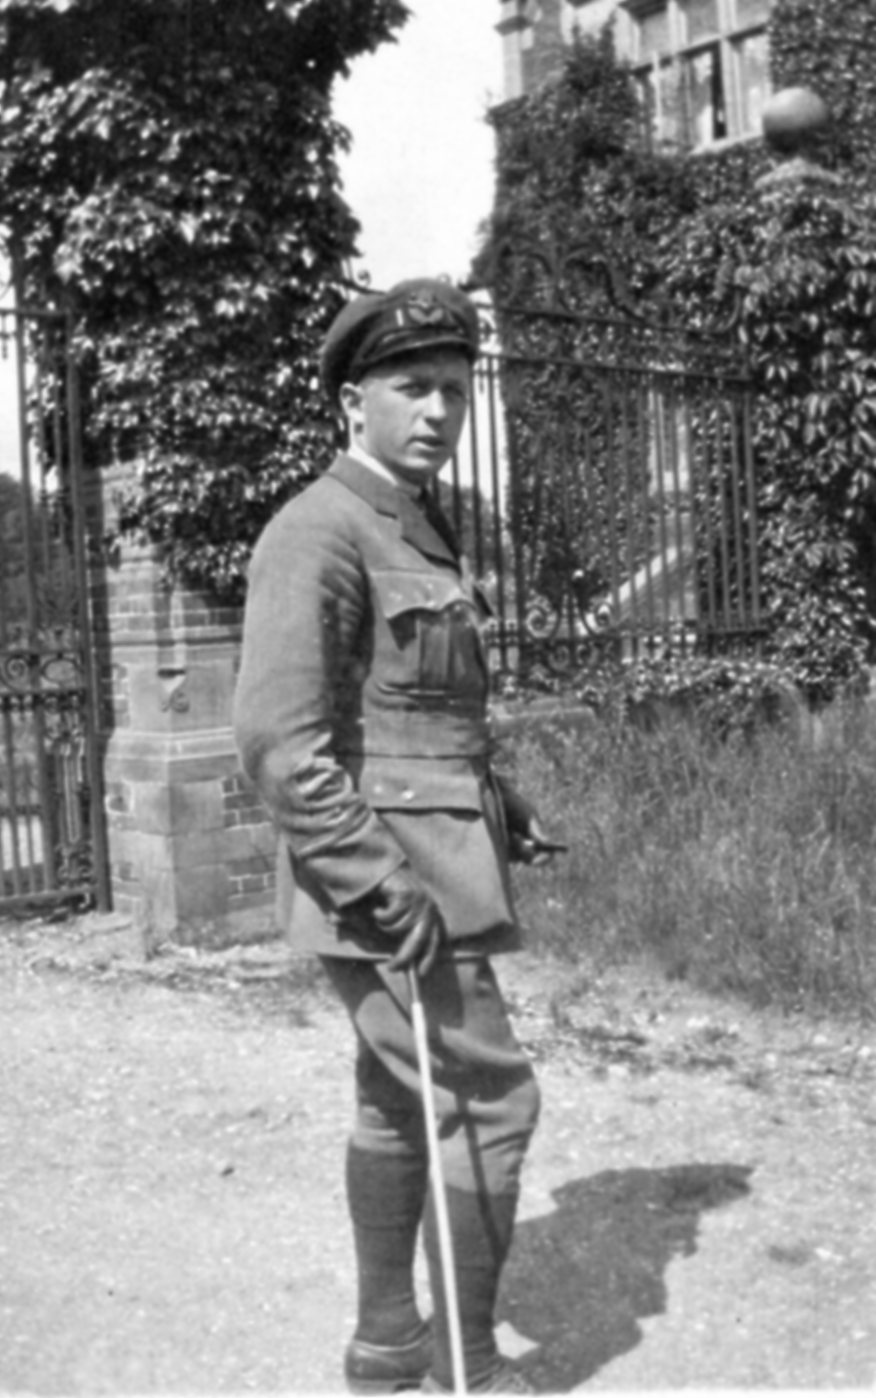 A man dressed in a military uniform standing casually in front of an iron fence outside of a house.